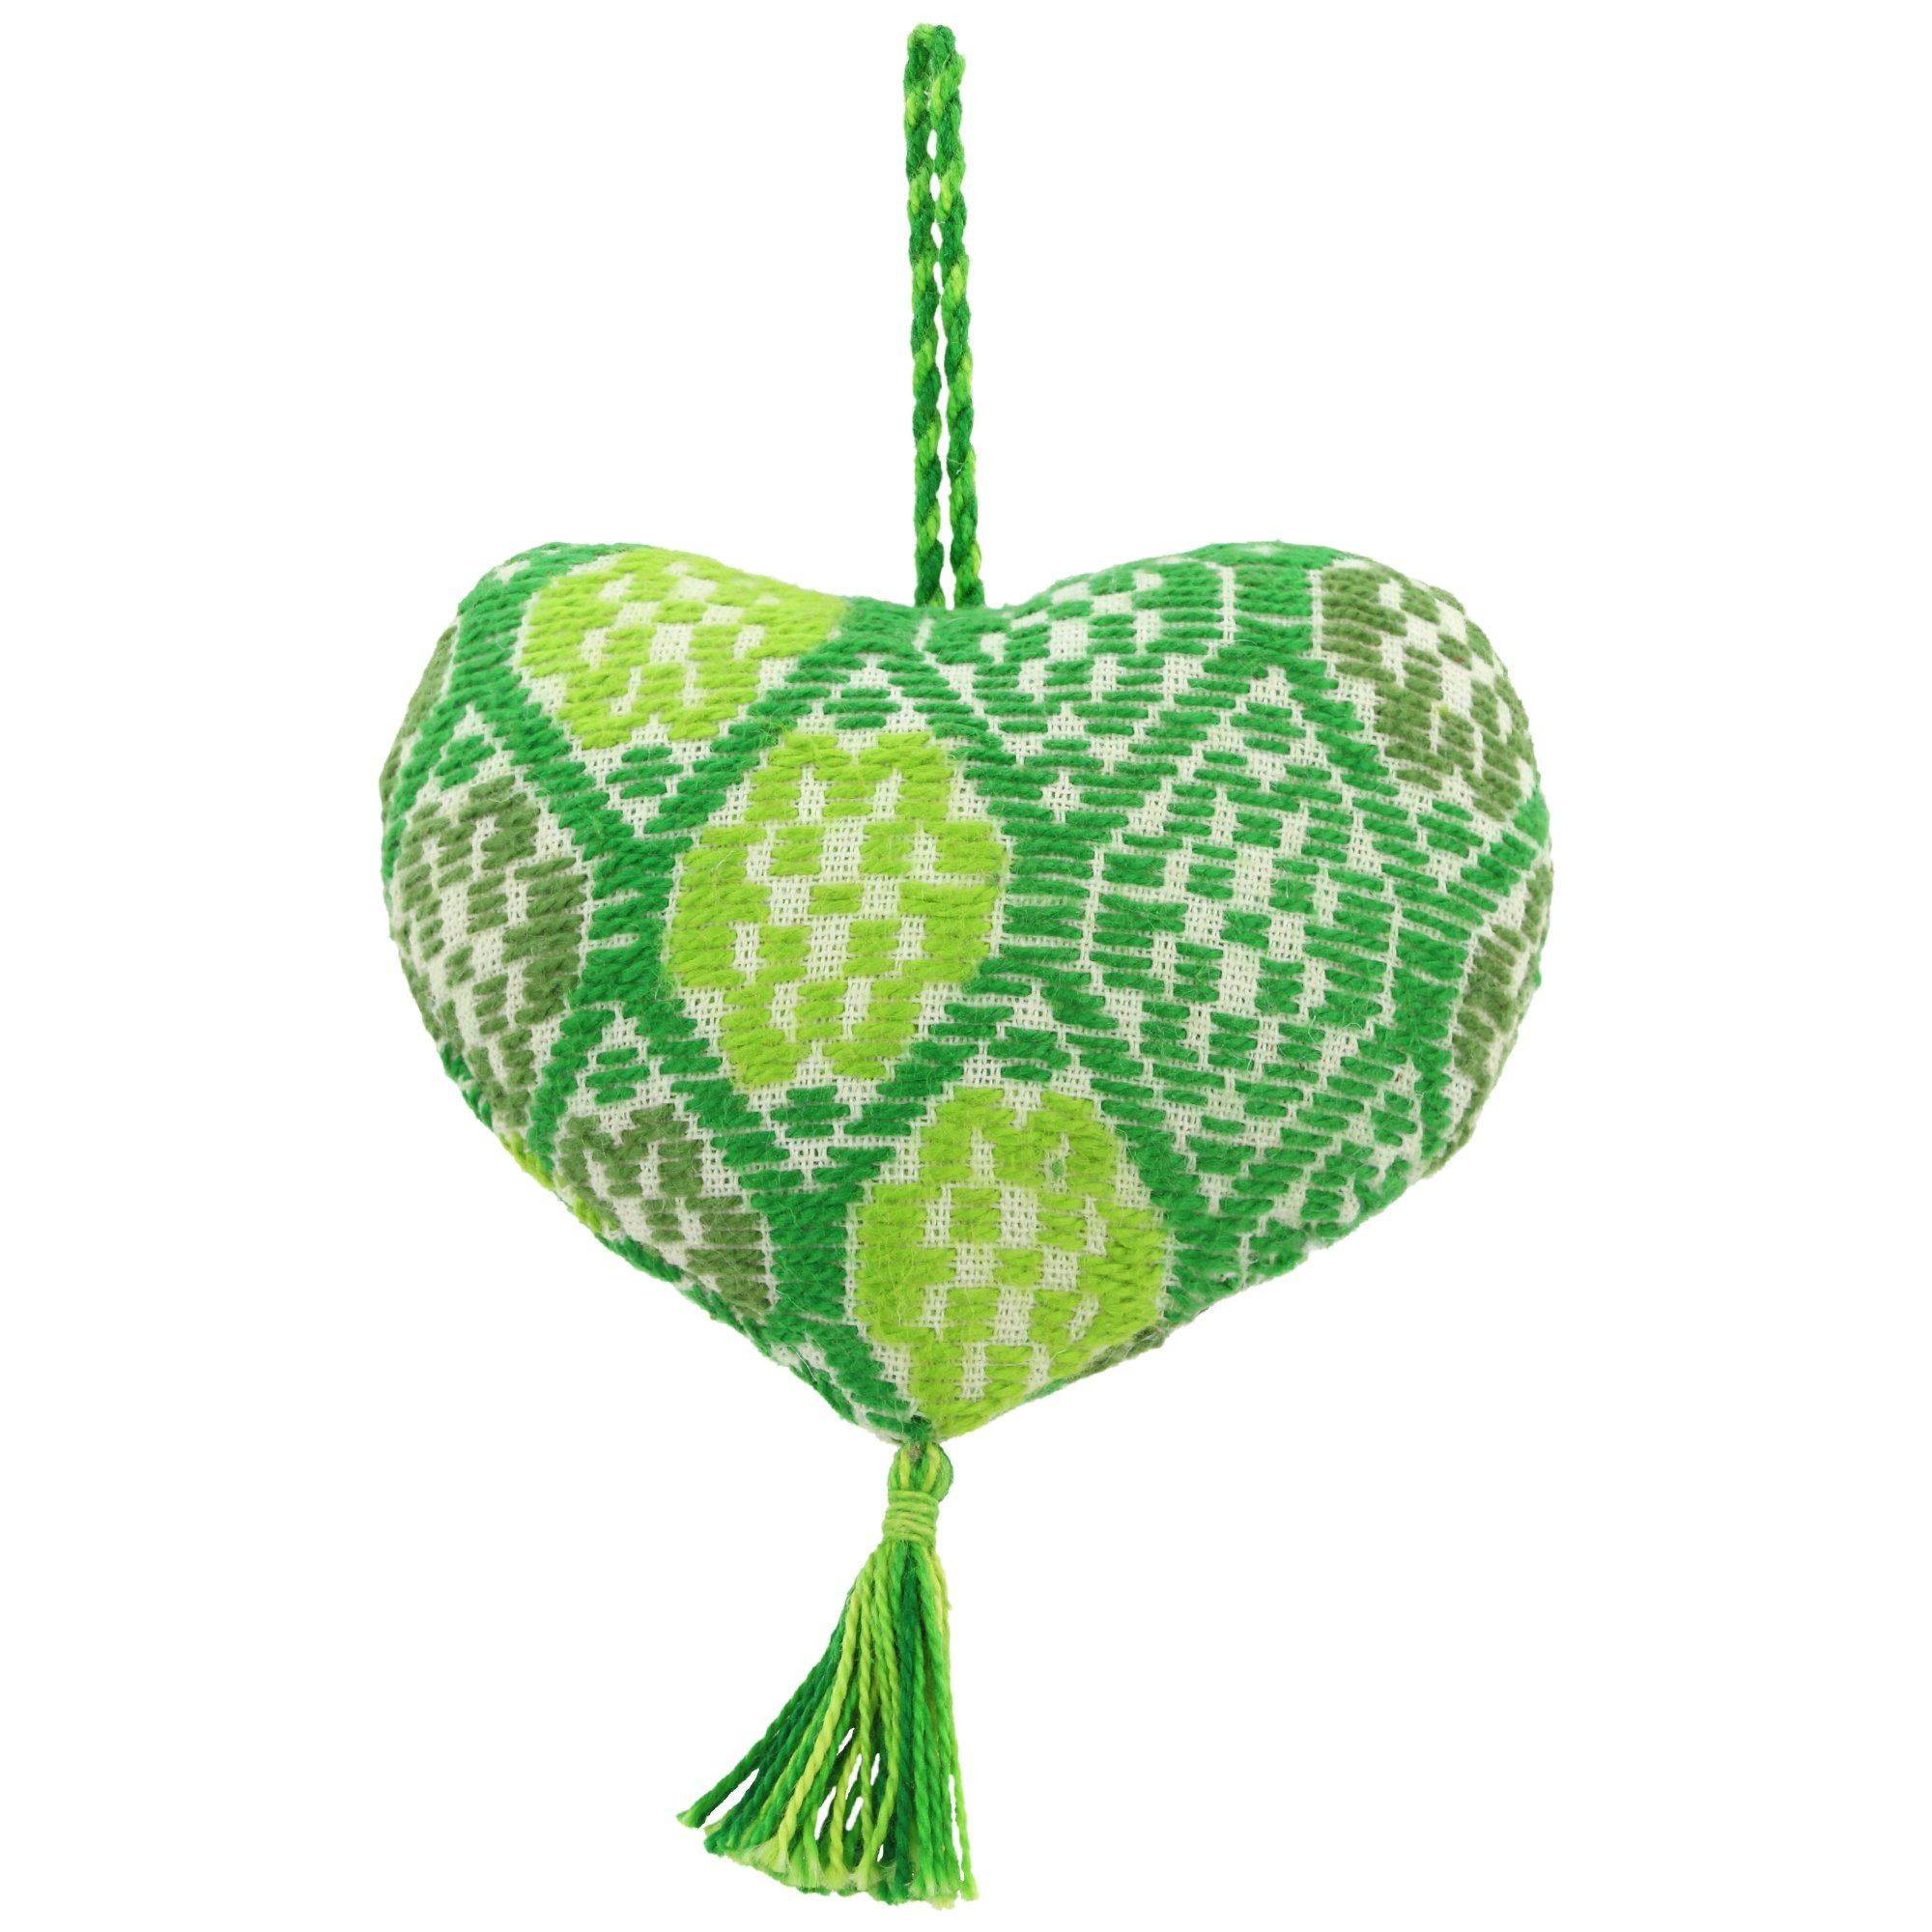 Hand-Embroidered Heart Ornament - Green - Single